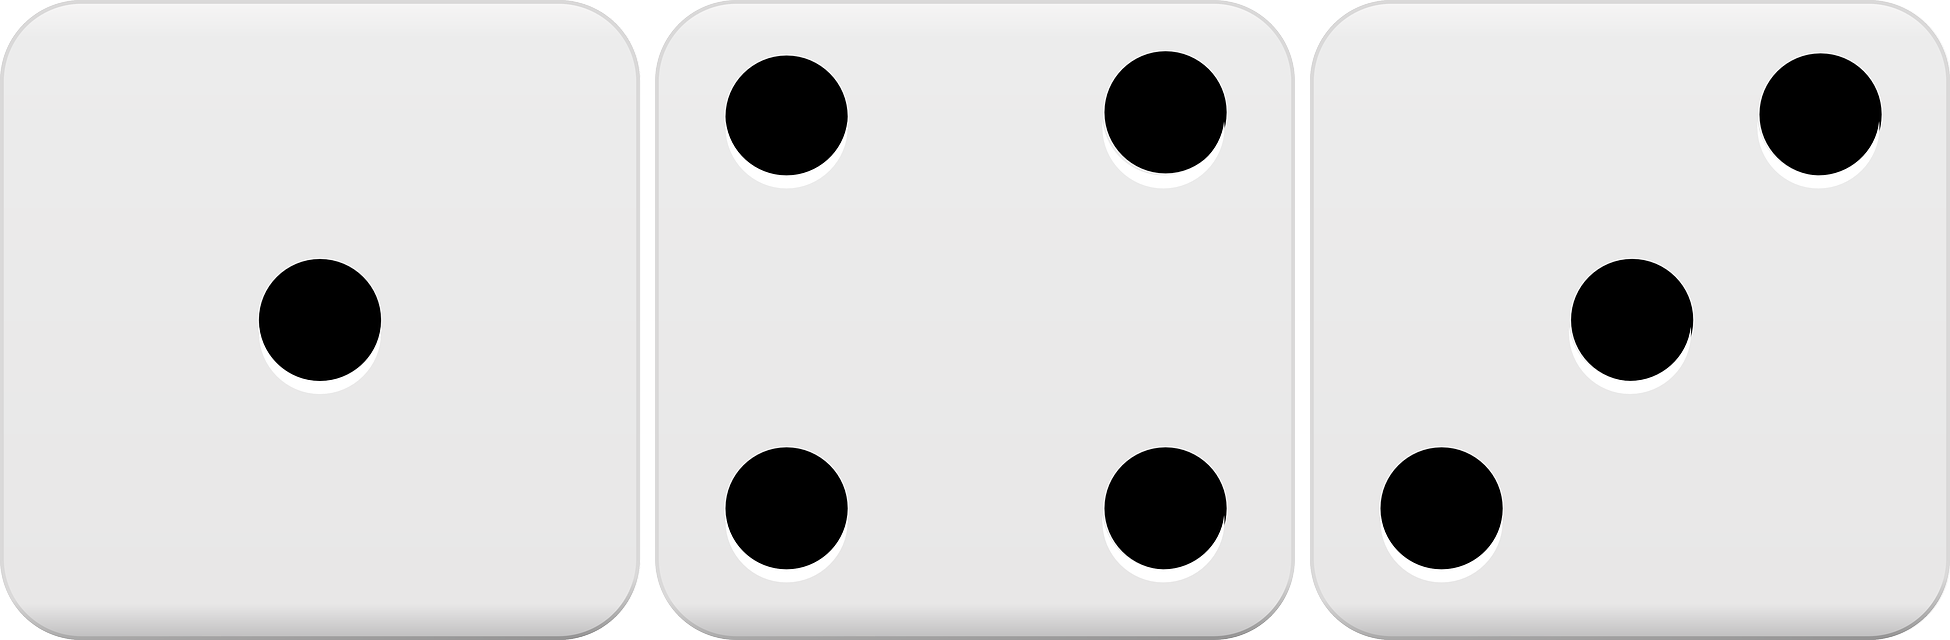 Three dice with 1, 4, 3 showing on the tops of the dice